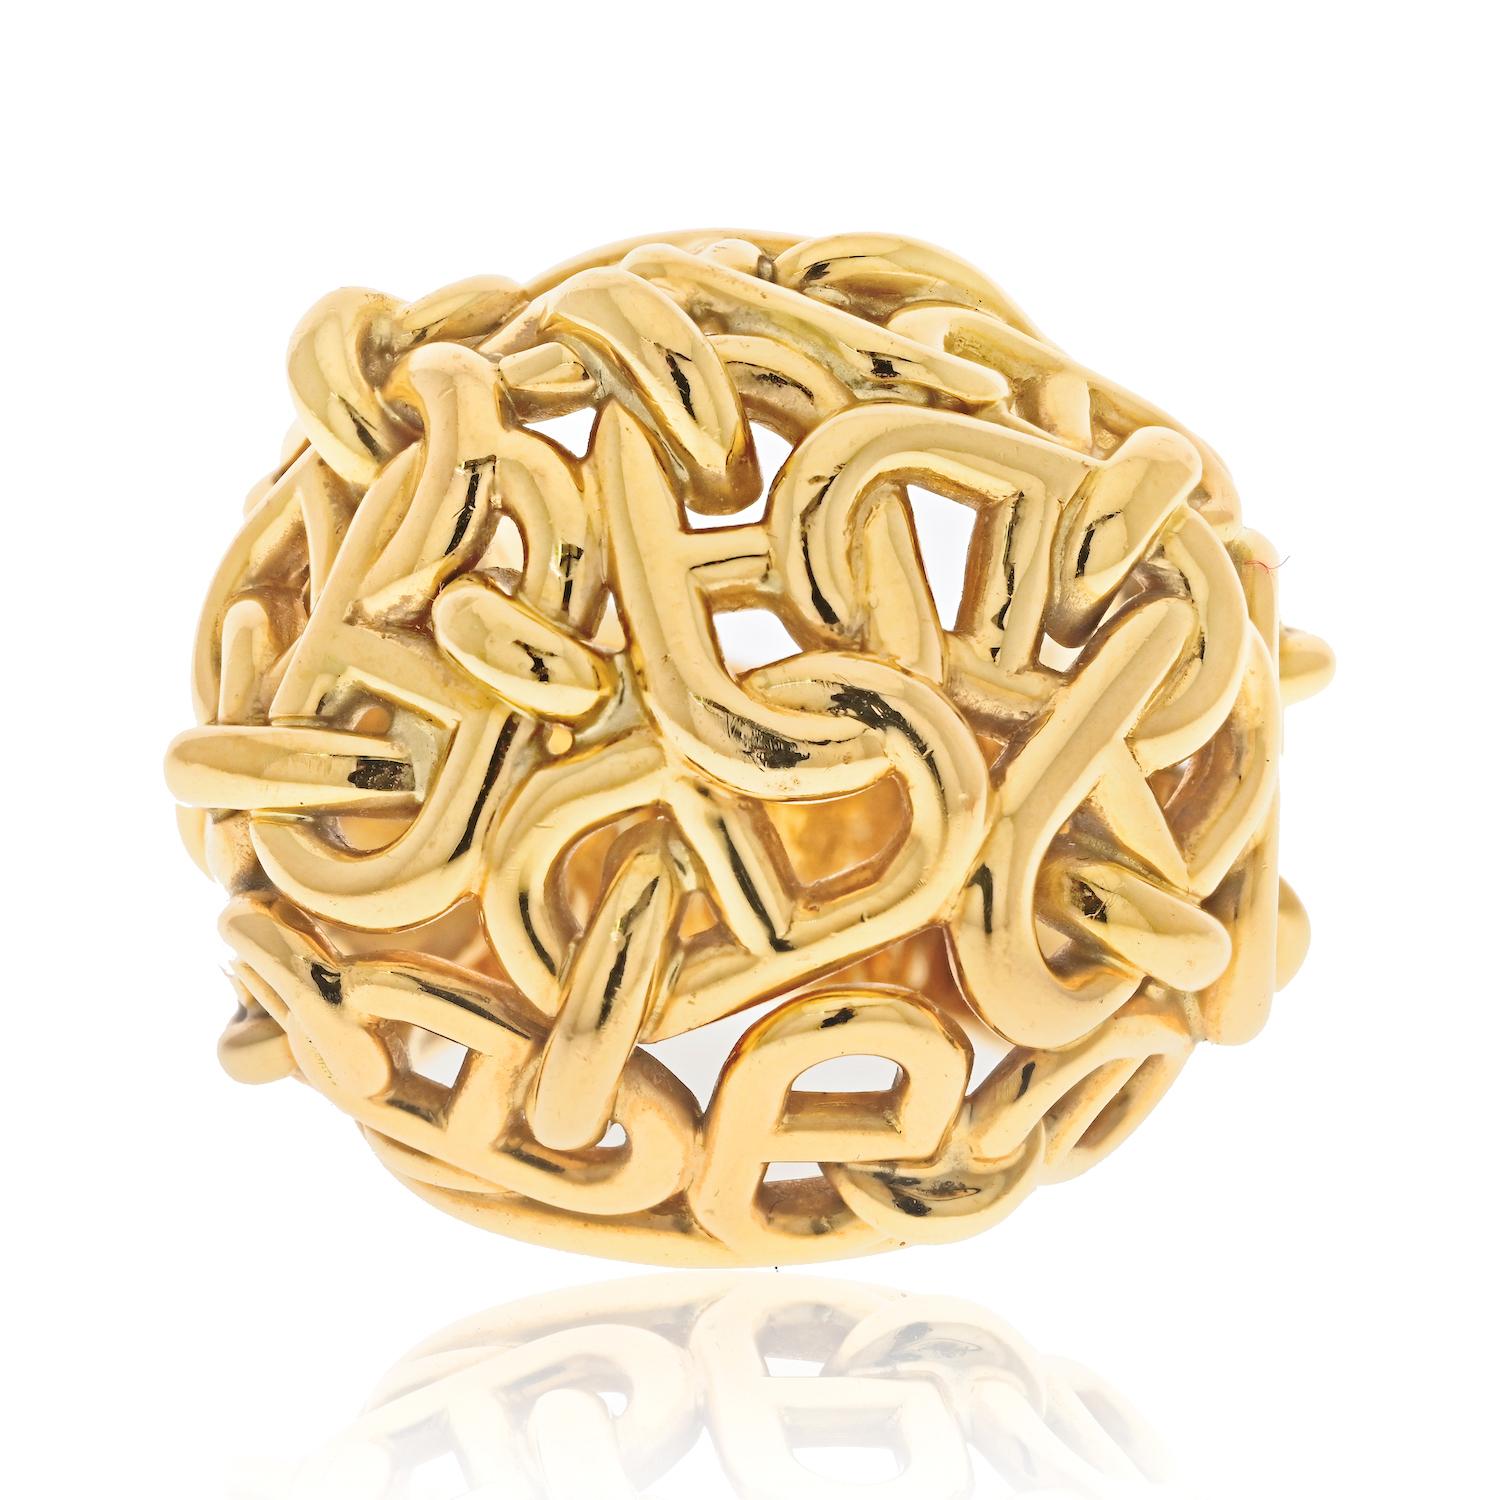 Hermes 18K Yellow Gold Chaîne d'Ancre Dome Cocktail Ring.

This Hermes yellow gold ring is a true work of art and a testament to the brand's commitment to craftsmanship and design. 

Weighing 46.7 grams, the ring features a dome design with an open